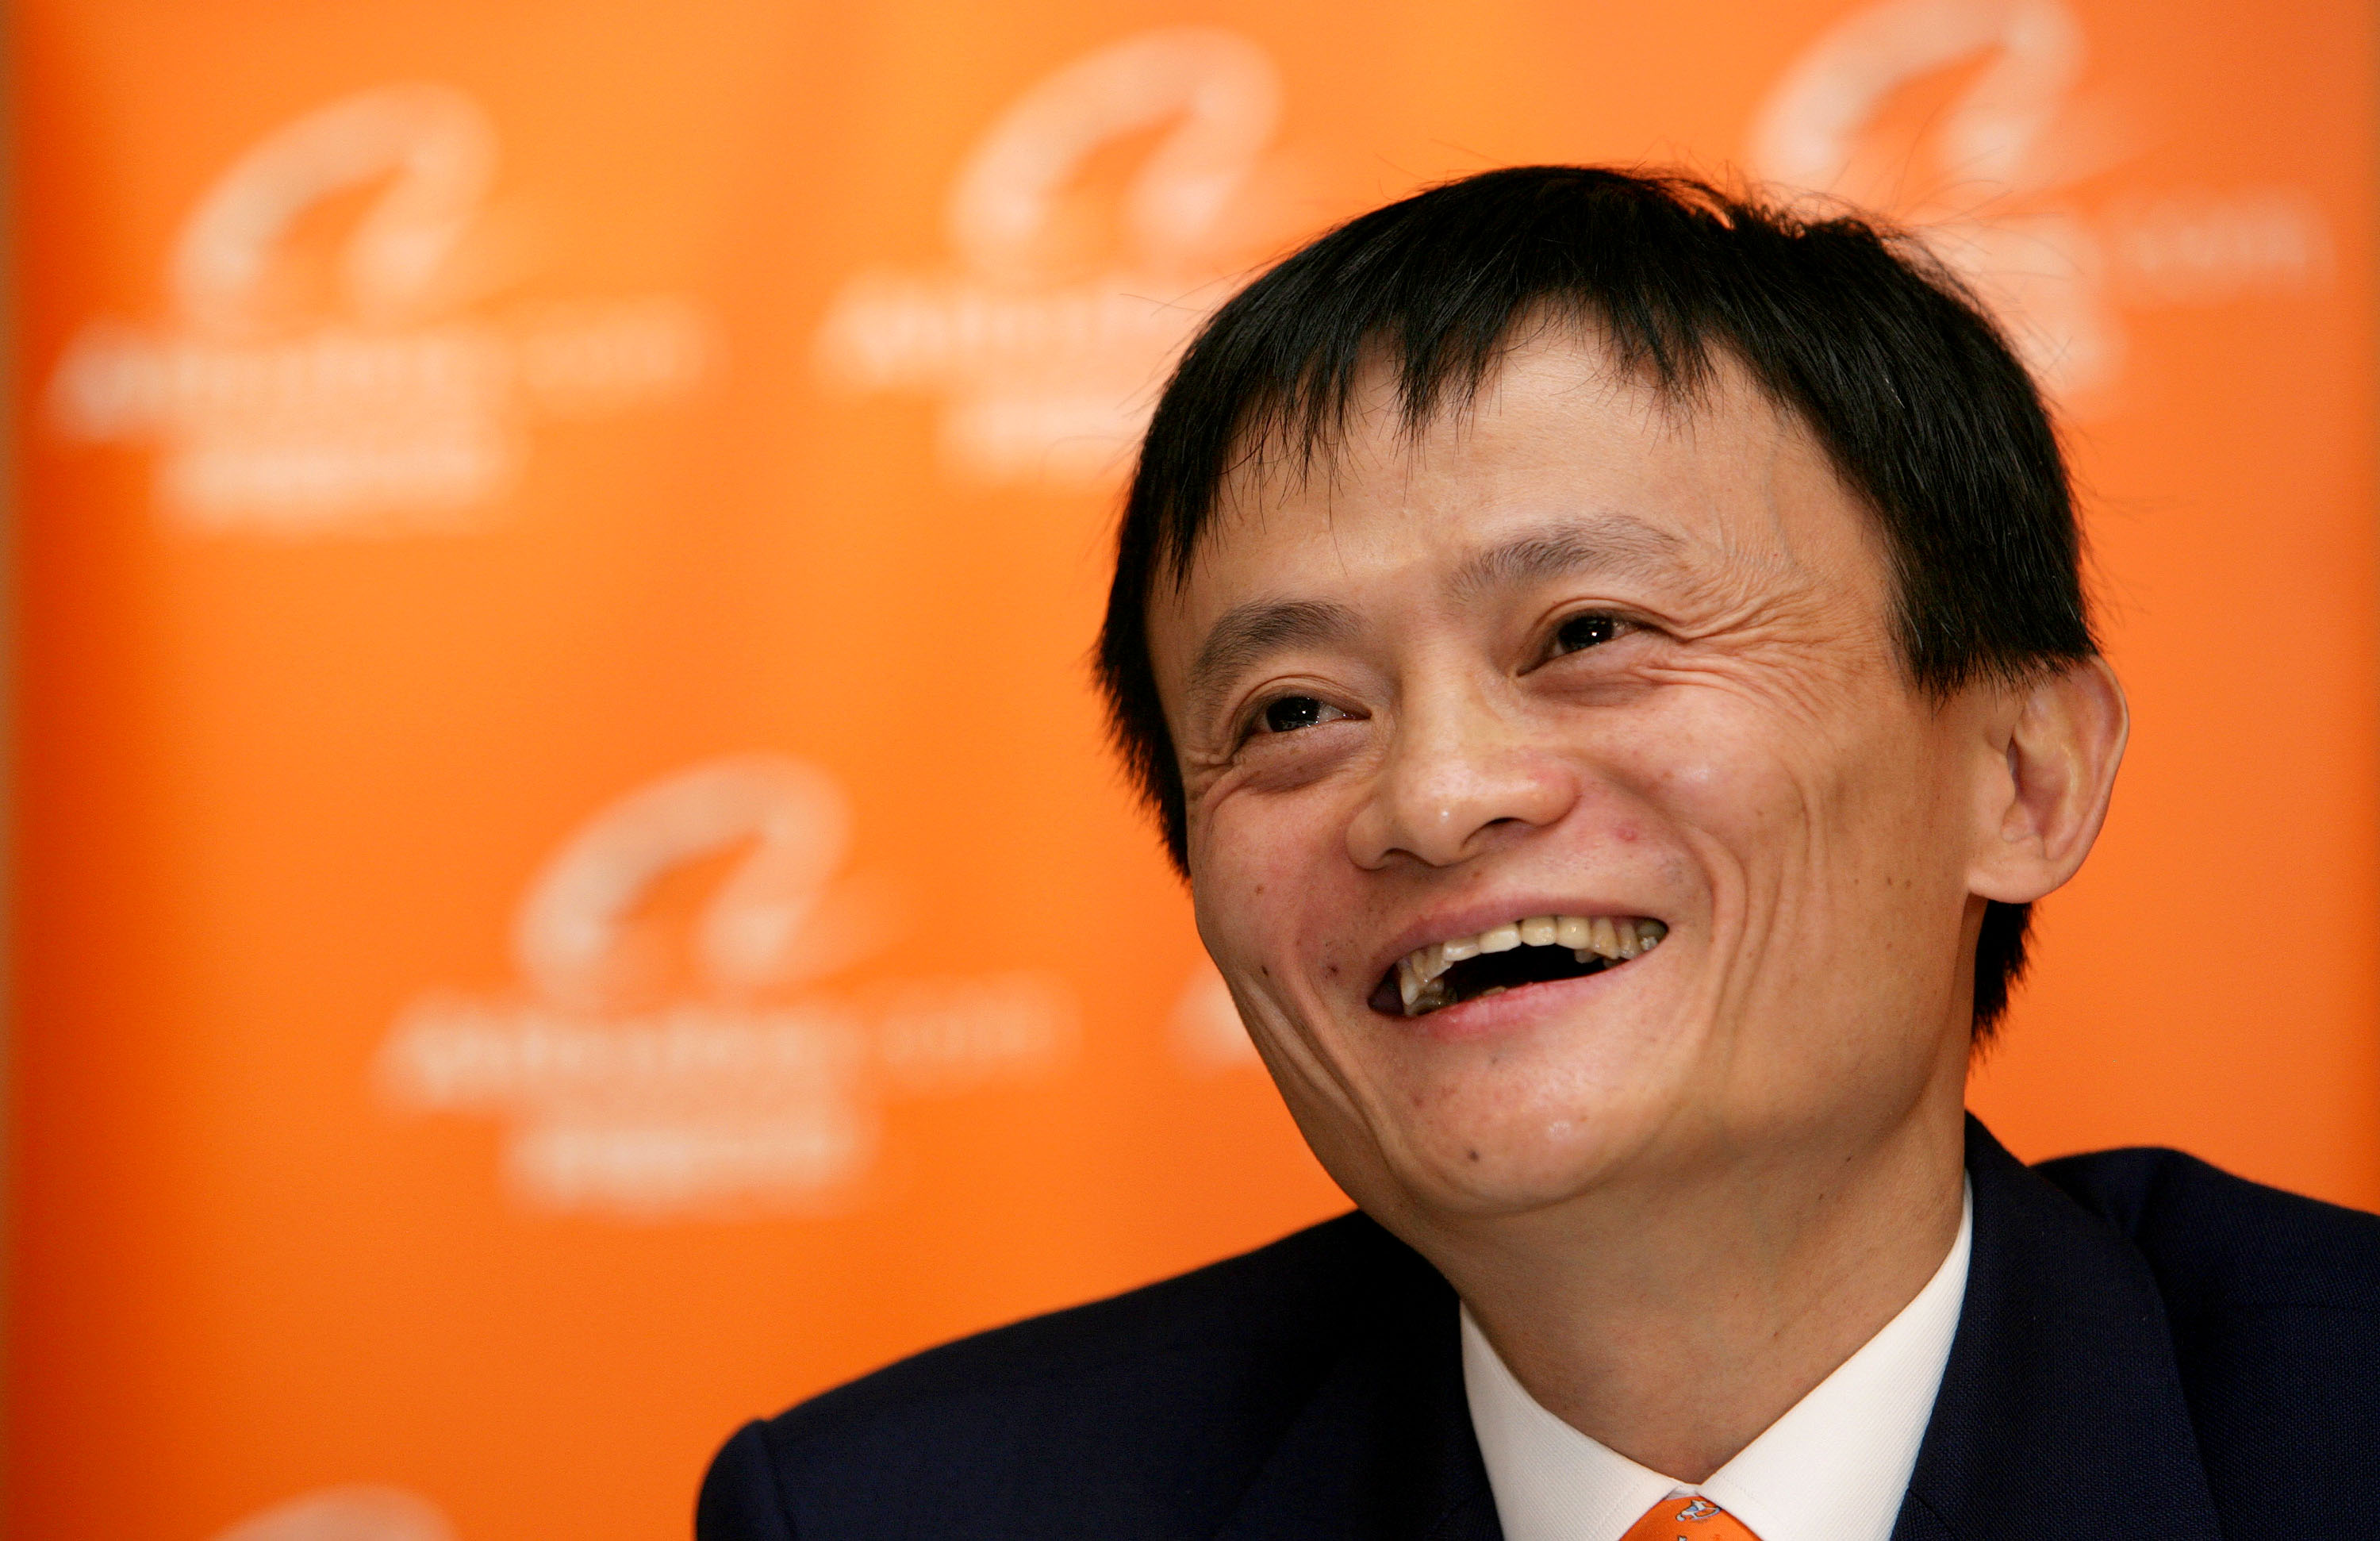 Jack Ma, chairman and then-chief executive officer of Alibaba Group Holding Ltd., laughs at a news conference in Hong Kong, China, on Tuesday, Nov. 6, 2007. | Daniel J. Groshong/Bloomberg